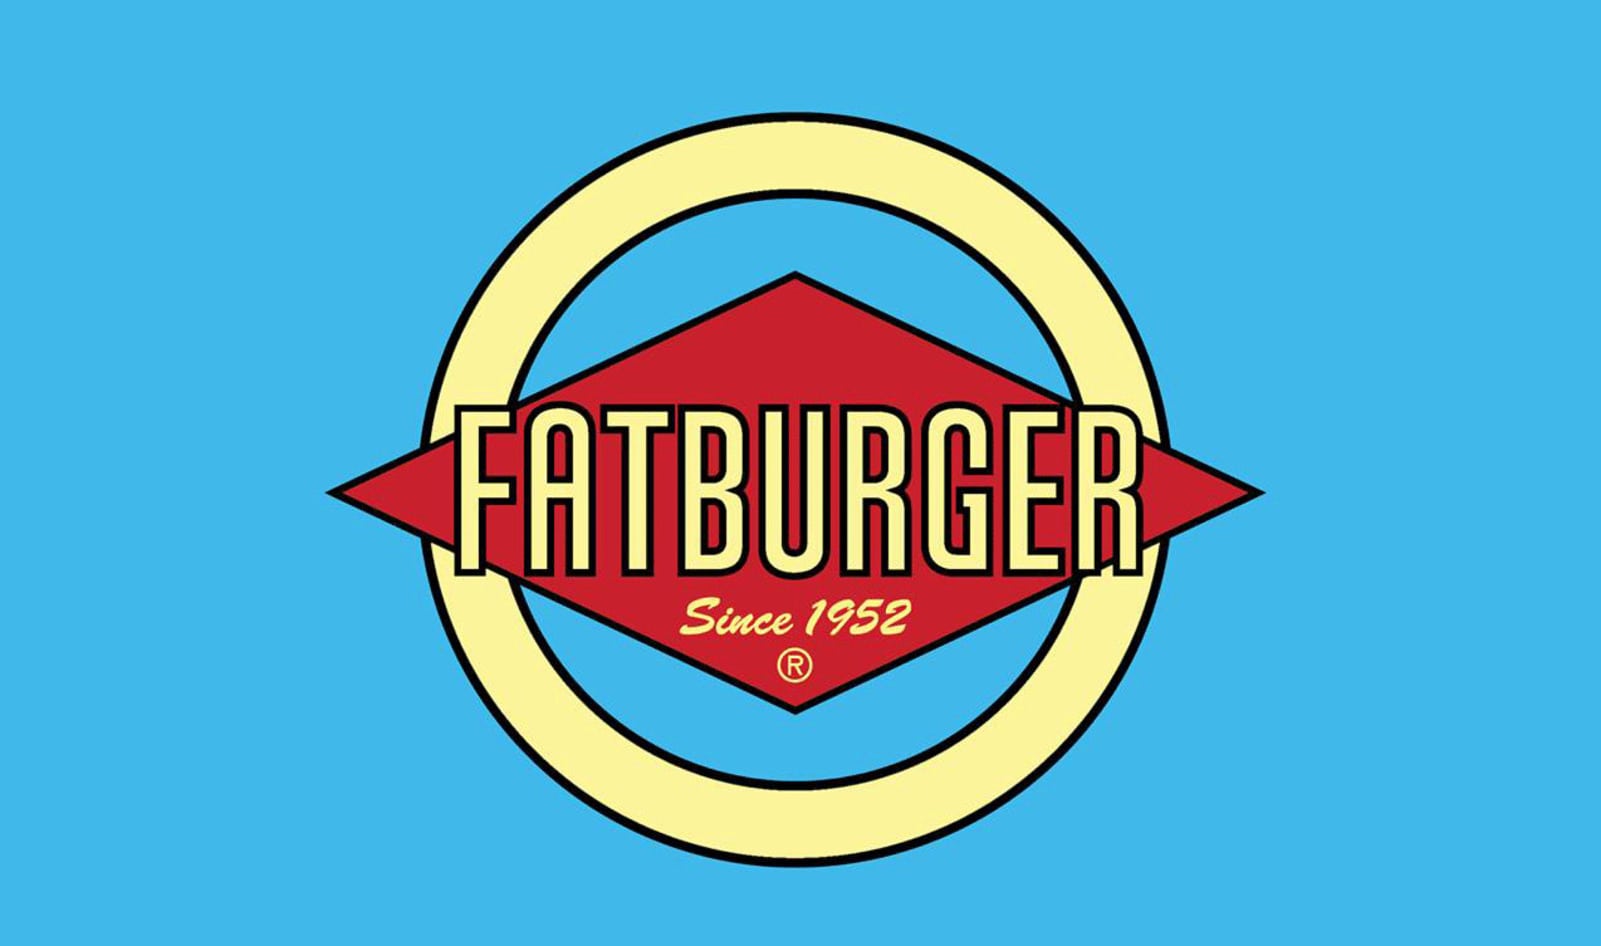 Fast-Food Chain Fatburger Adds Vegan Cheese to Complement Impossible Burger